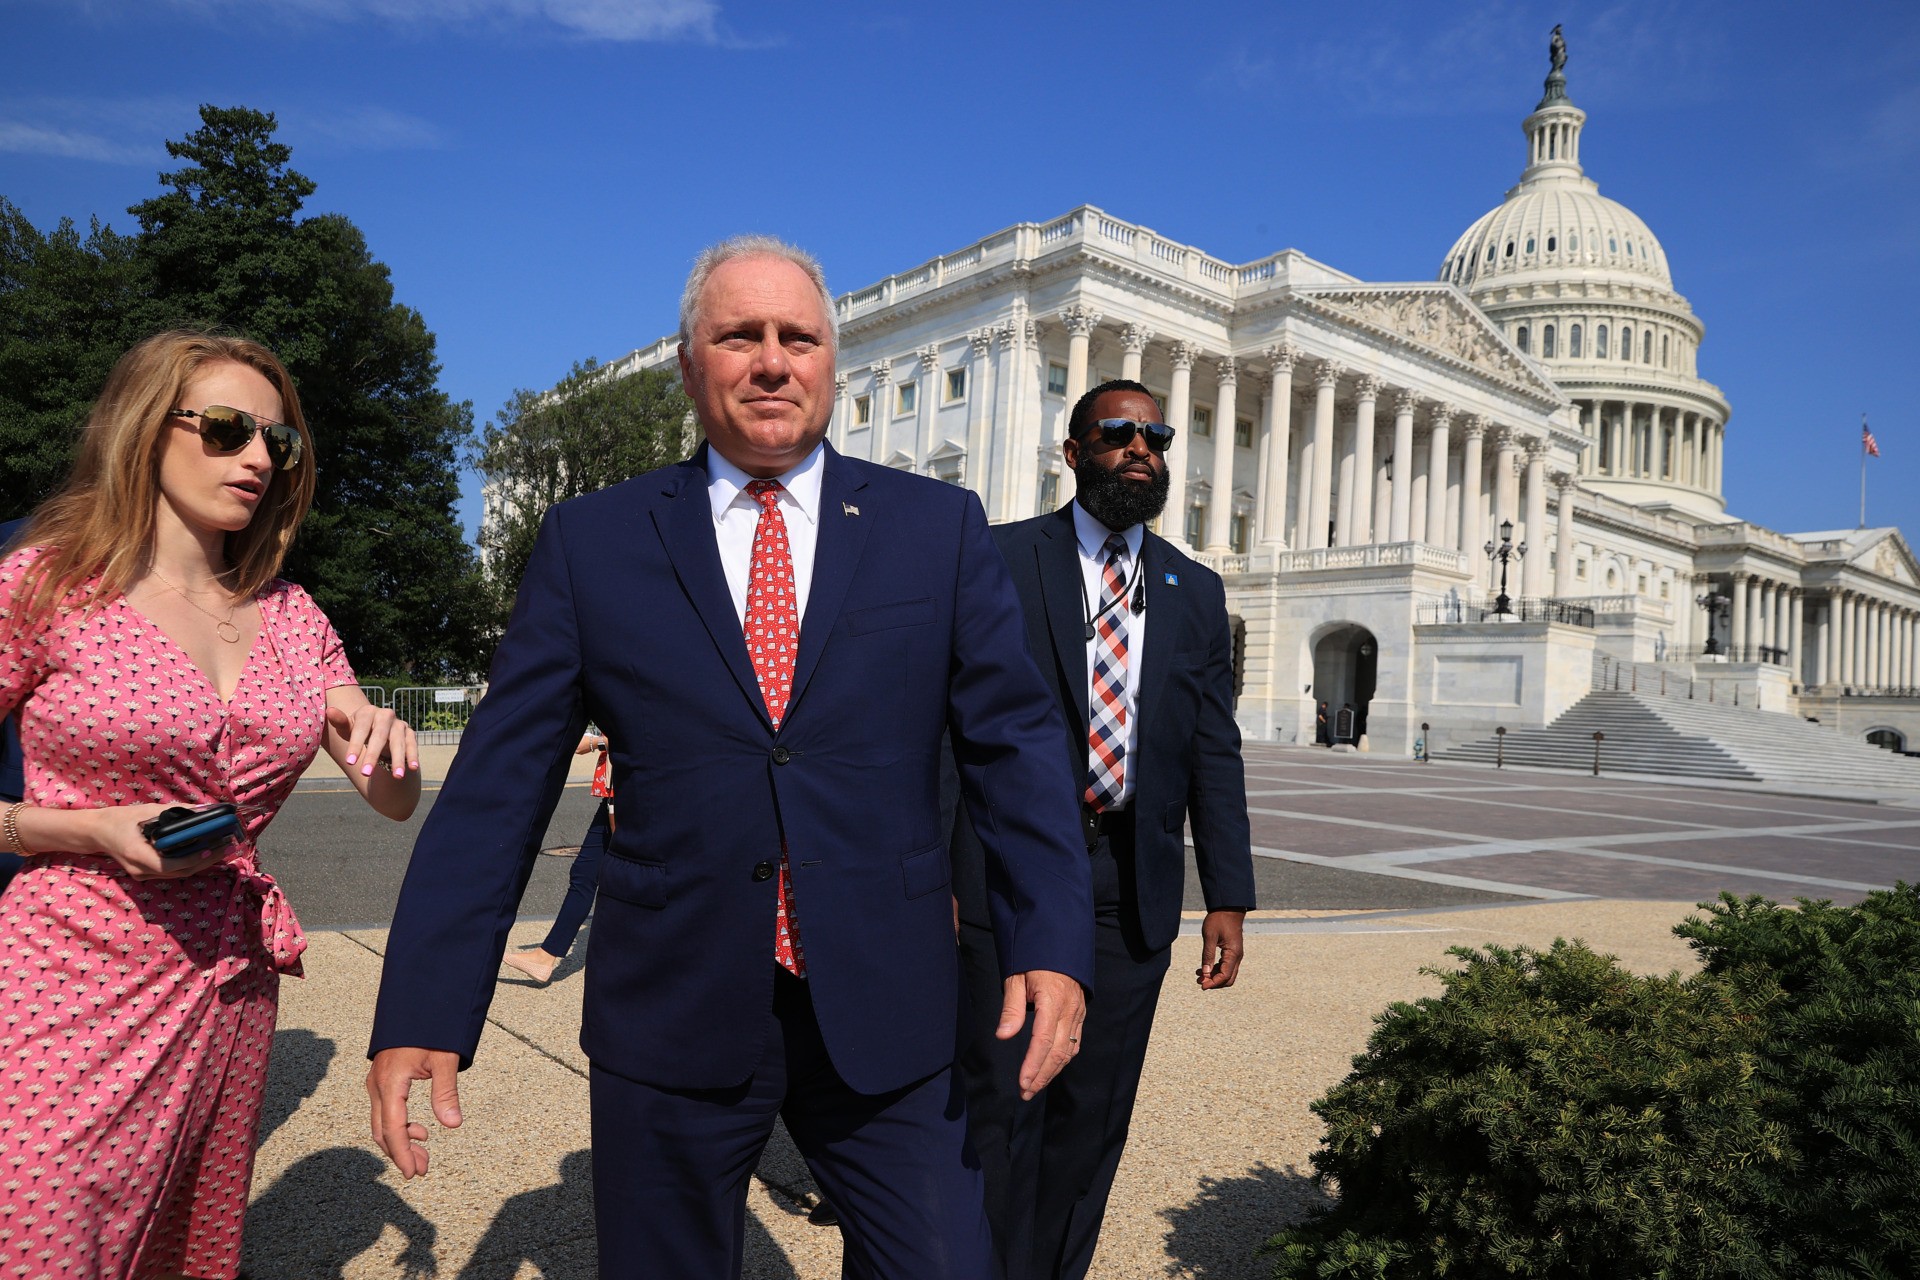 WASHINGTON, DC - AUGUST 24: House Minority Whip Steve Scalise (R-LA) arrives for a news conference with members of the Republican caucus, some of them military veterans, to criticize the Biden Administration's handling of the withdrawal from Afghanistan outside the U.S. Capitol on August 24, 2021 in Washington, DC. Republicans pointed out the amount of military equipment left in the hands of the Taliban and said Biden must do more to help get the Afghans and Americans 'left behind enemy lines' out of the country. (Photo by Chip Somodevilla/Getty Images)